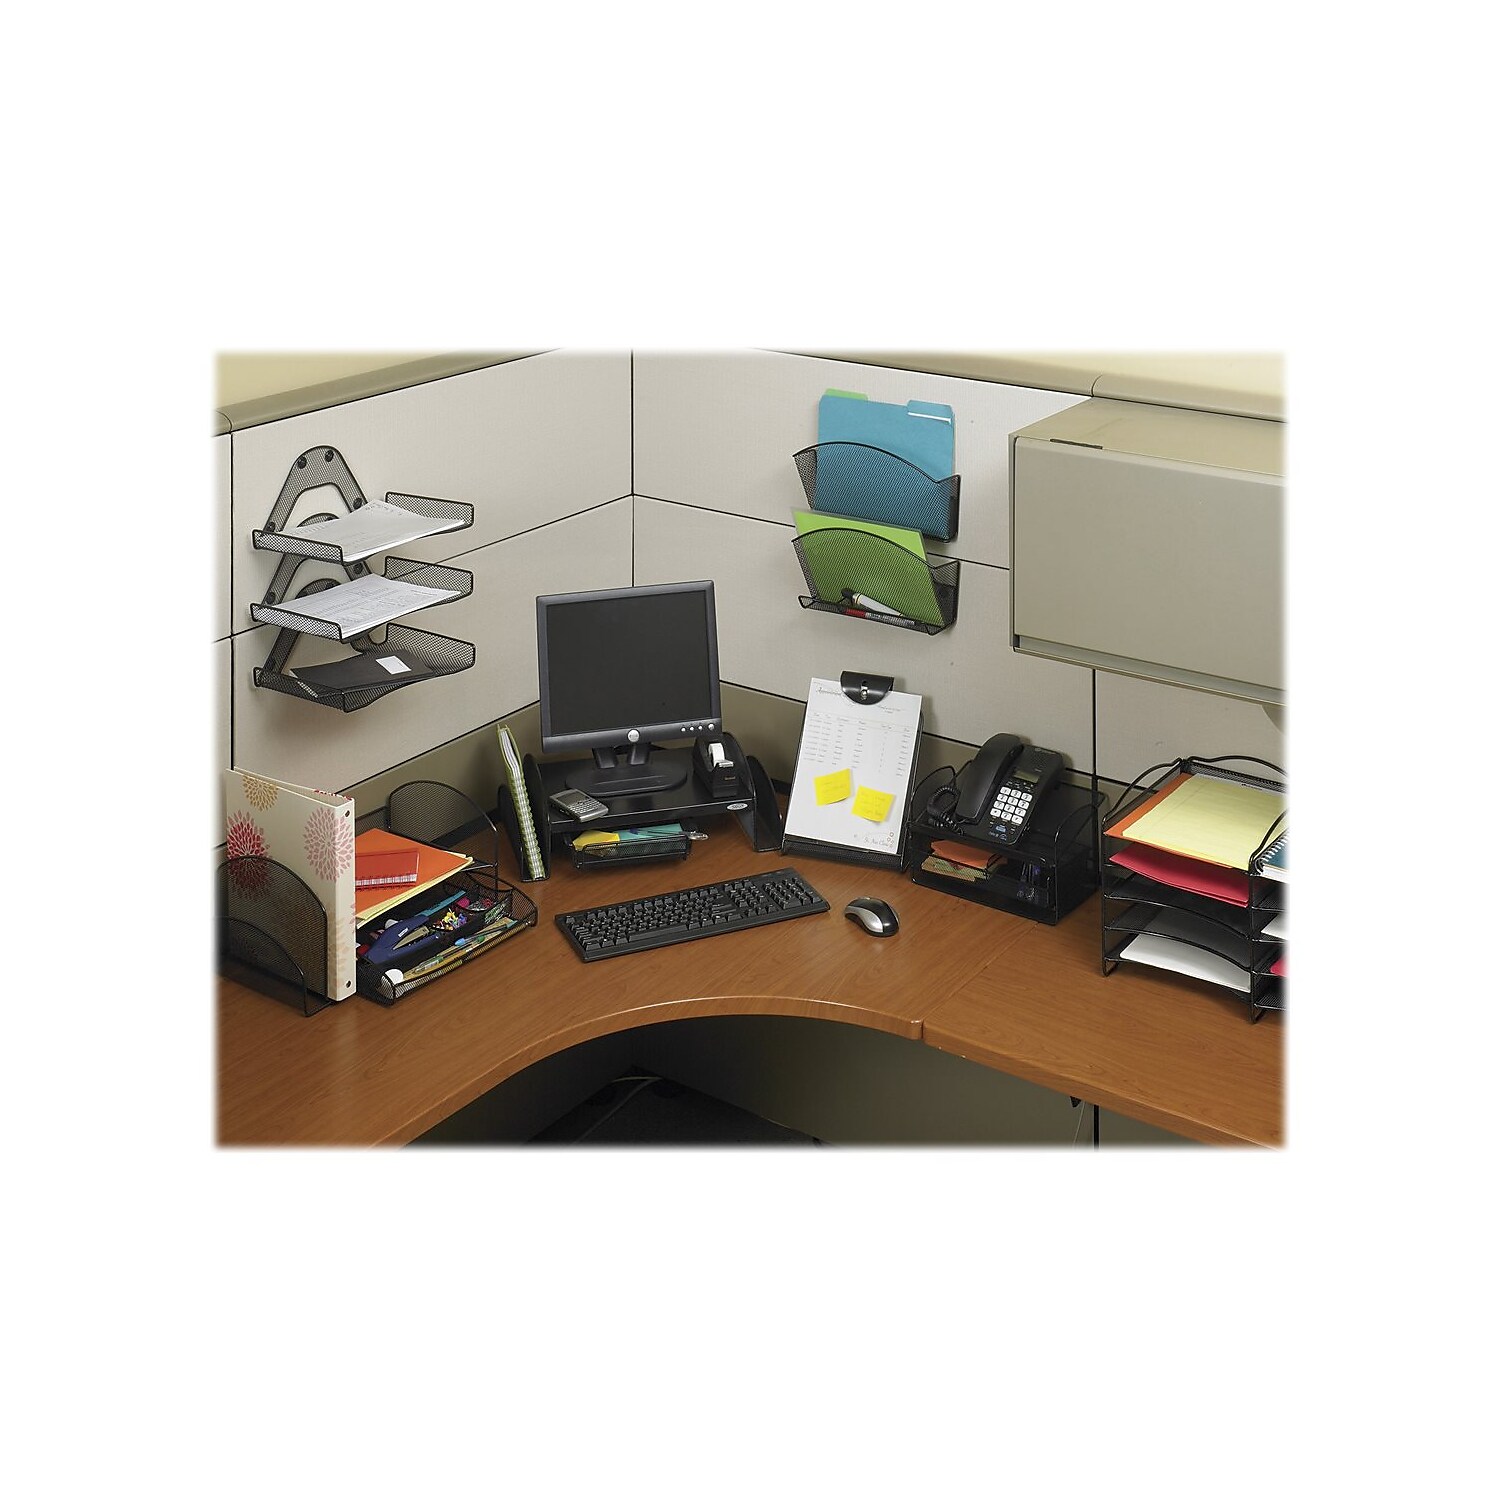 Safco Onyx Mesh Monitor Stand - image 5 of 5